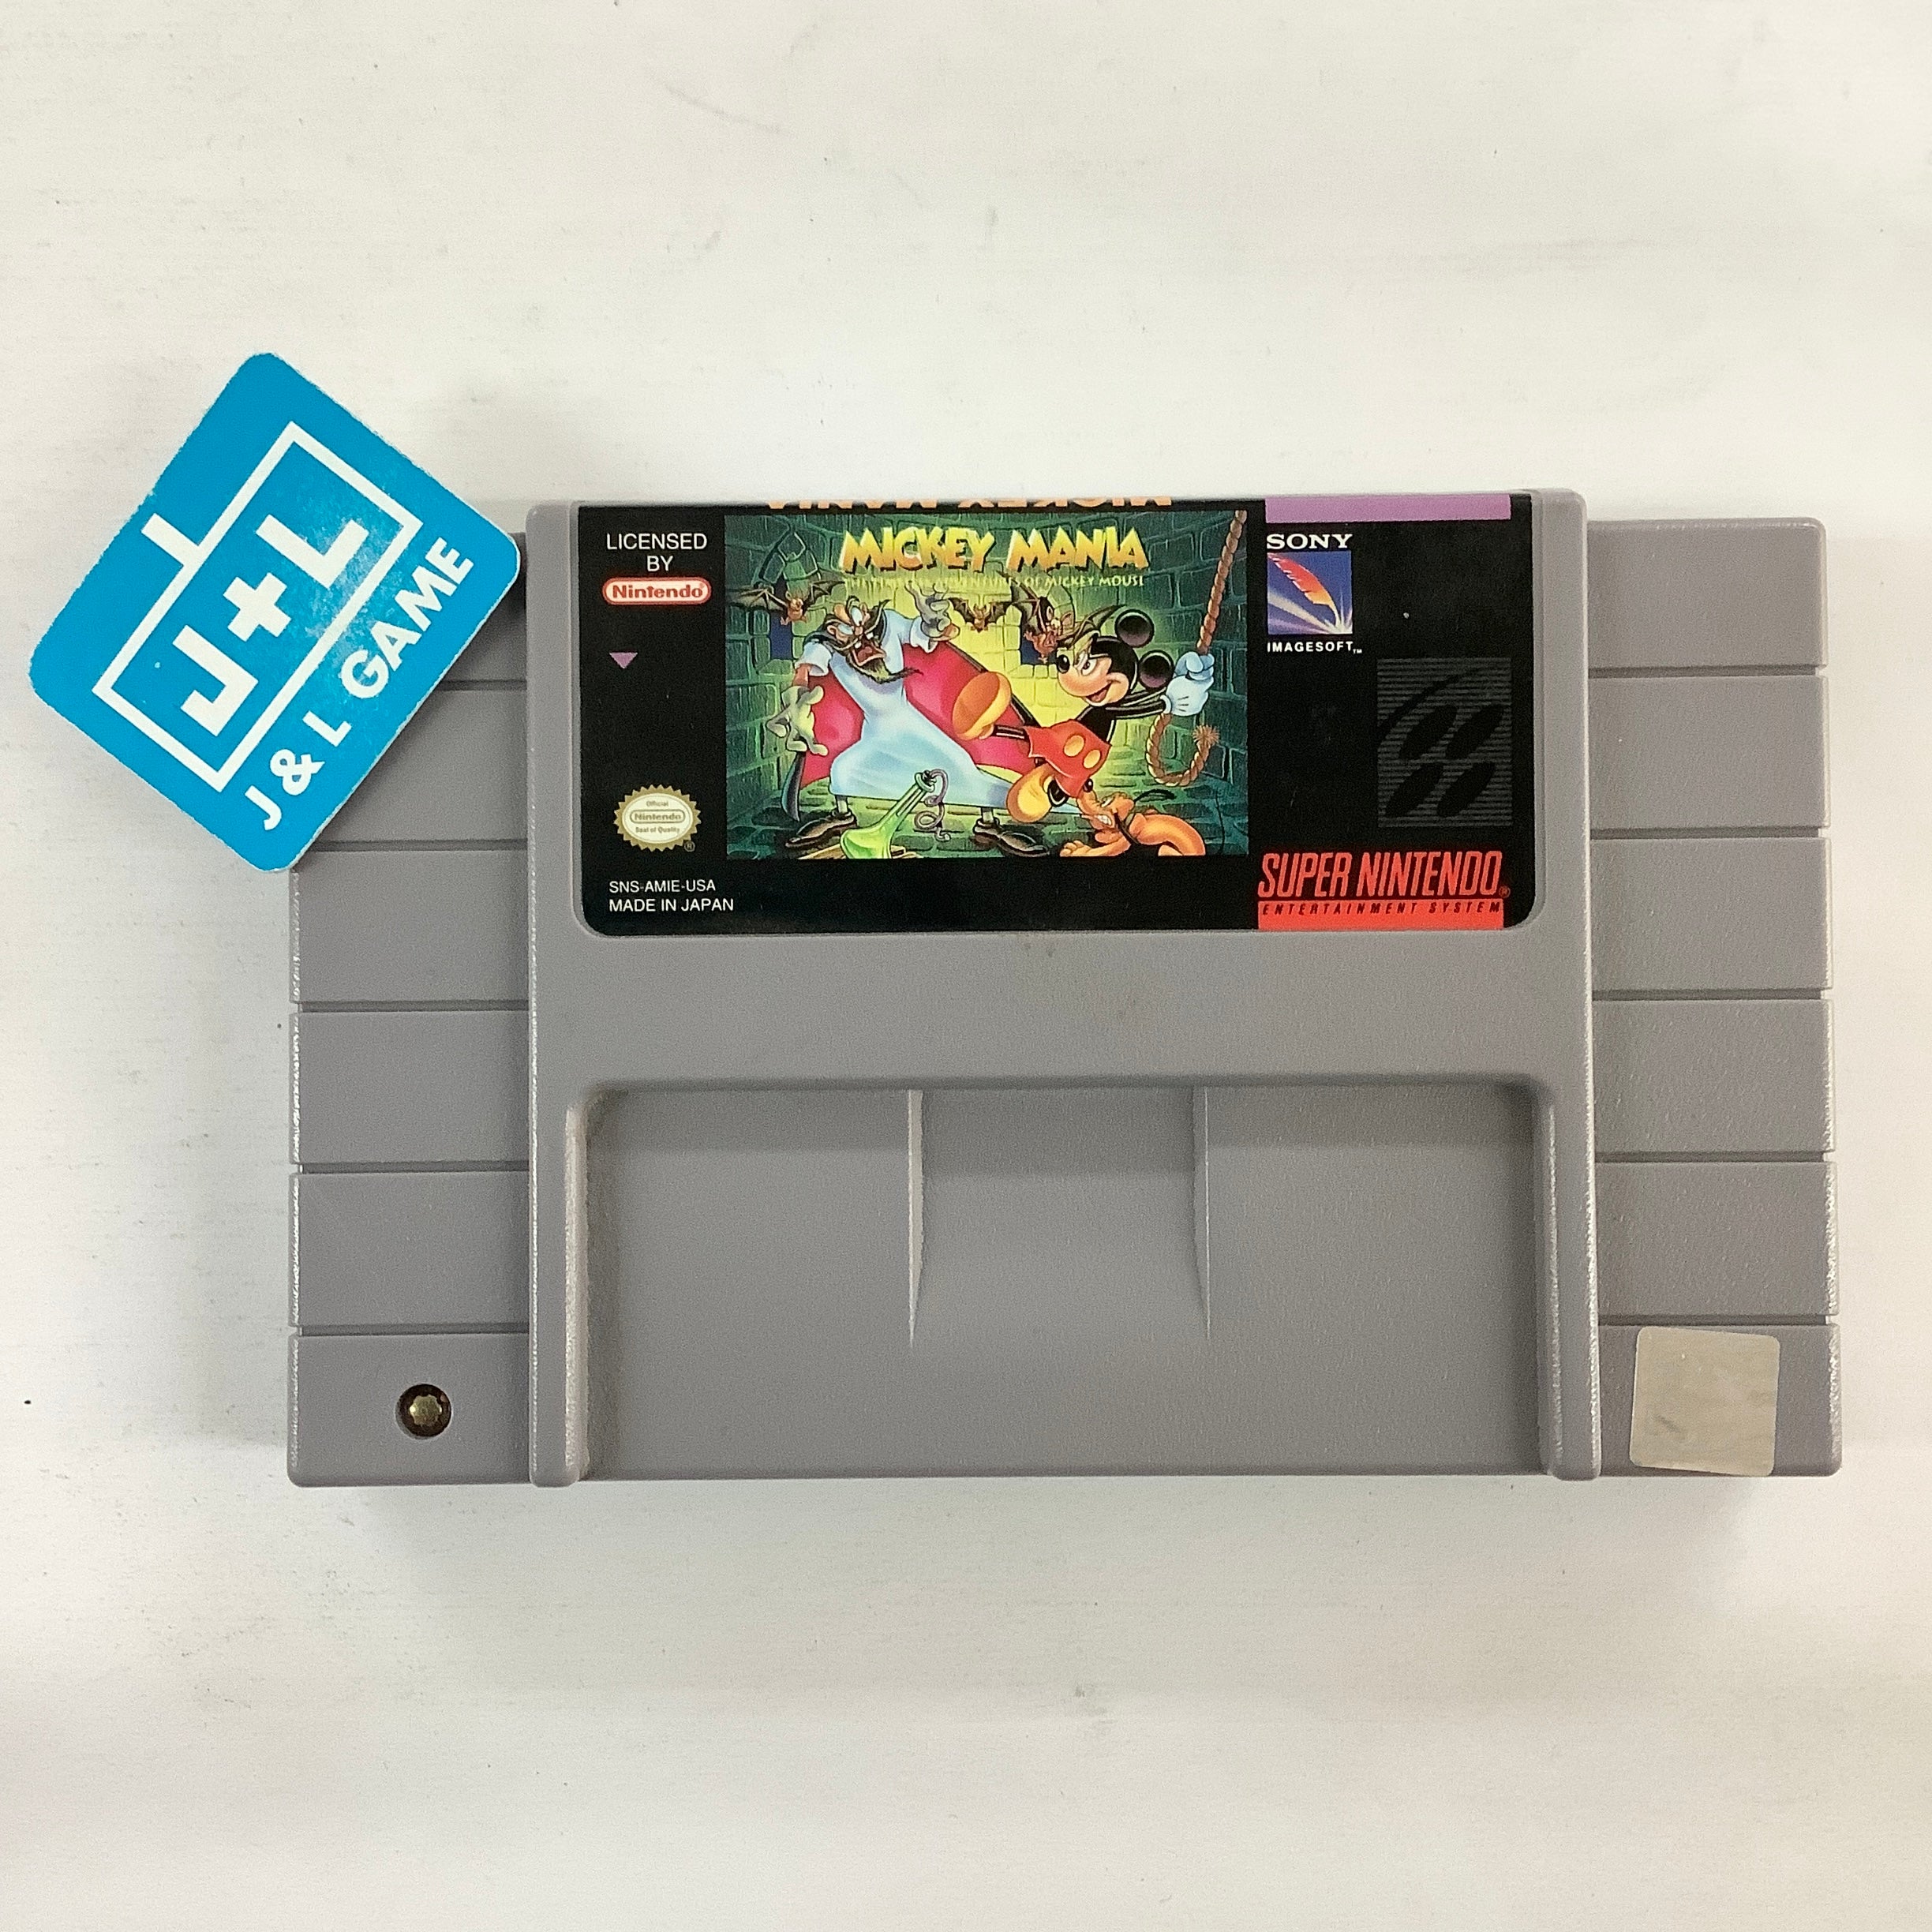 Mickey Mania: The Timeless Adventures of Mickey Mouse - (SNES) Super Nintendo [Pre-Owned] Video Games Sony Imagesoft   